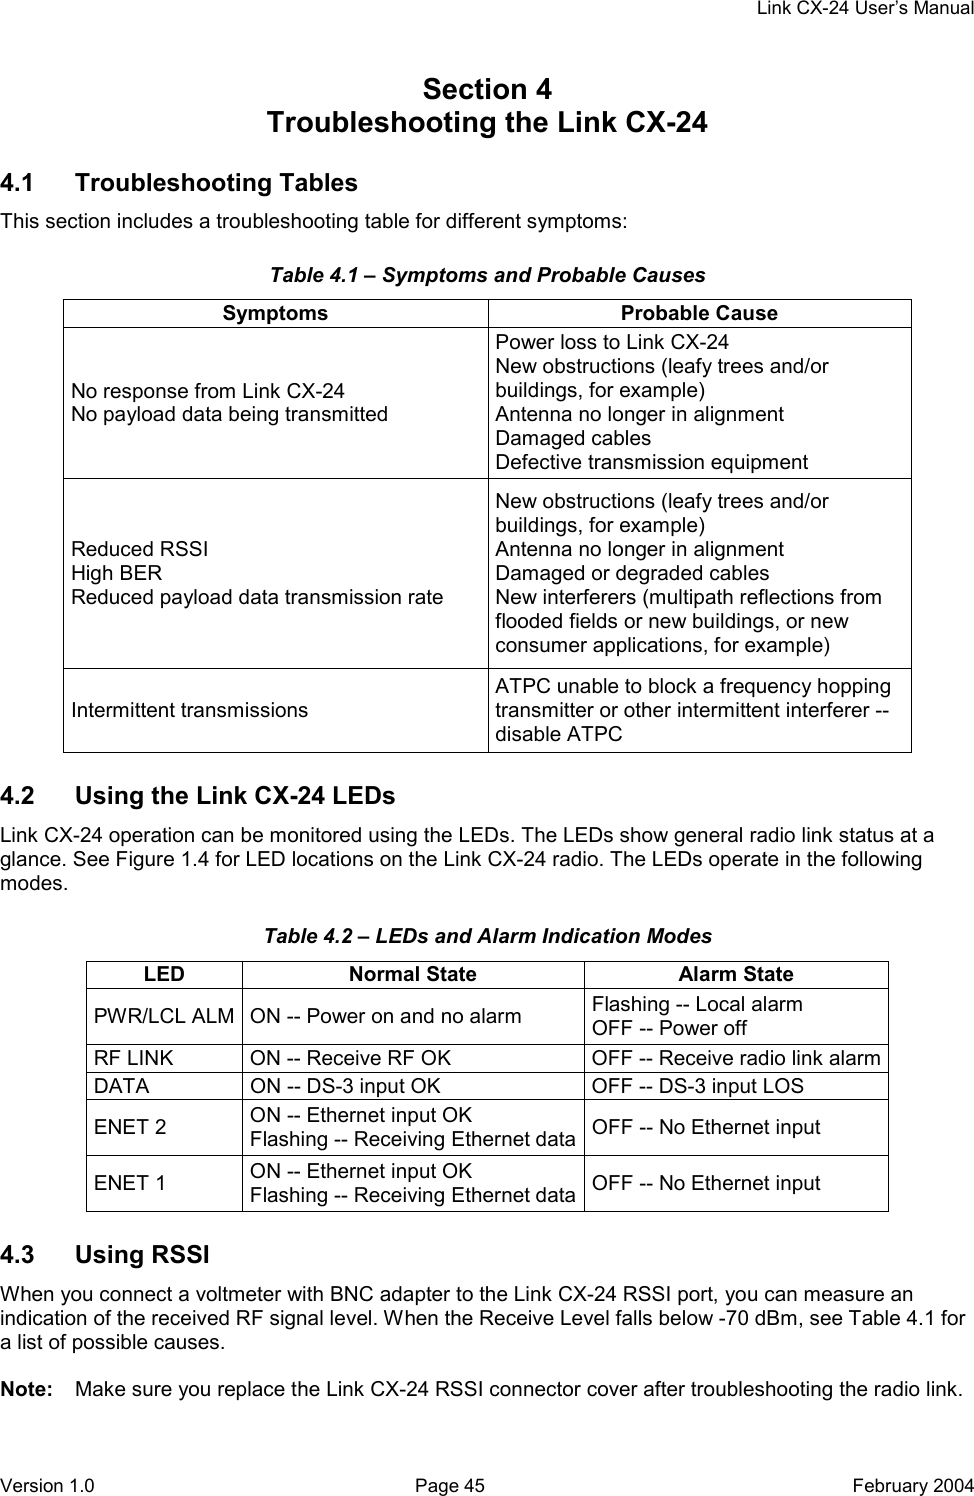     Link CX-24 User’s Manual Version 1.0  Page 45  February 2004 Section 4    Troubleshooting the Link CX-24 4.1 Troubleshooting Tables This section includes a troubleshooting table for different symptoms: Table 4.1 – Symptoms and Probable Causes Symptoms Probable Cause No response from Link CX-24 No payload data being transmitted Power loss to Link CX-24 New obstructions (leafy trees and/or buildings, for example) Antenna no longer in alignment Damaged cables Defective transmission equipment Reduced RSSI High BER Reduced payload data transmission rate New obstructions (leafy trees and/or buildings, for example) Antenna no longer in alignment Damaged or degraded cables New interferers (multipath reflections from flooded fields or new buildings, or new consumer applications, for example) Intermittent transmissions ATPC unable to block a frequency hopping transmitter or other intermittent interferer -- disable ATPC 4.2  Using the Link CX-24 LEDs Link CX-24 operation can be monitored using the LEDs. The LEDs show general radio link status at a glance. See Figure 1.4 for LED locations on the Link CX-24 radio. The LEDs operate in the following modes. Table 4.2 – LEDs and Alarm Indication Modes LED  Normal State  Alarm State PWR/LCL ALM  ON -- Power on and no alarm  Flashing -- Local alarm OFF -- Power off RF LINK  ON -- Receive RF OK  OFF -- Receive radio link alarmDATA  ON -- DS-3 input OK  OFF -- DS-3 input LOS ENET 2  ON -- Ethernet input OK Flashing -- Receiving Ethernet data OFF -- No Ethernet input ENET 1  ON -- Ethernet input OK Flashing -- Receiving Ethernet data OFF -- No Ethernet input 4.3 Using RSSI When you connect a voltmeter with BNC adapter to the Link CX-24 RSSI port, you can measure an indication of the received RF signal level. When the Receive Level falls below -70 dBm, see Table 4.1 for a list of possible causes.  Note:  Make sure you replace the Link CX-24 RSSI connector cover after troubleshooting the radio link. 